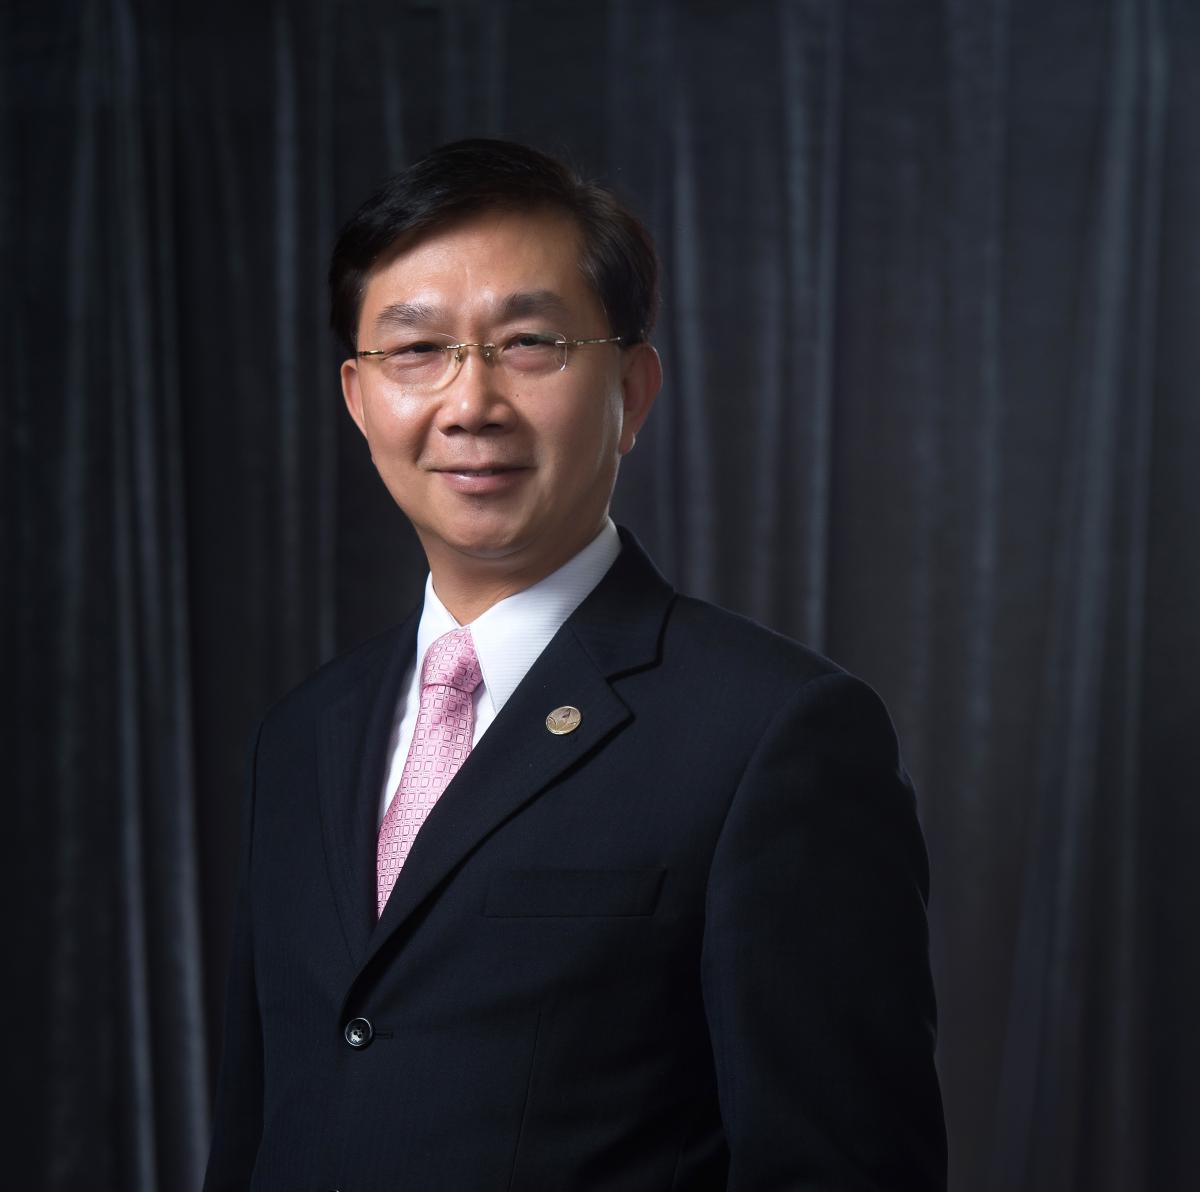 Professor Chin-Kun Wang is the president of the International Society for Nutraceuticals and Functional Foods (ISNFF) in Taiwan